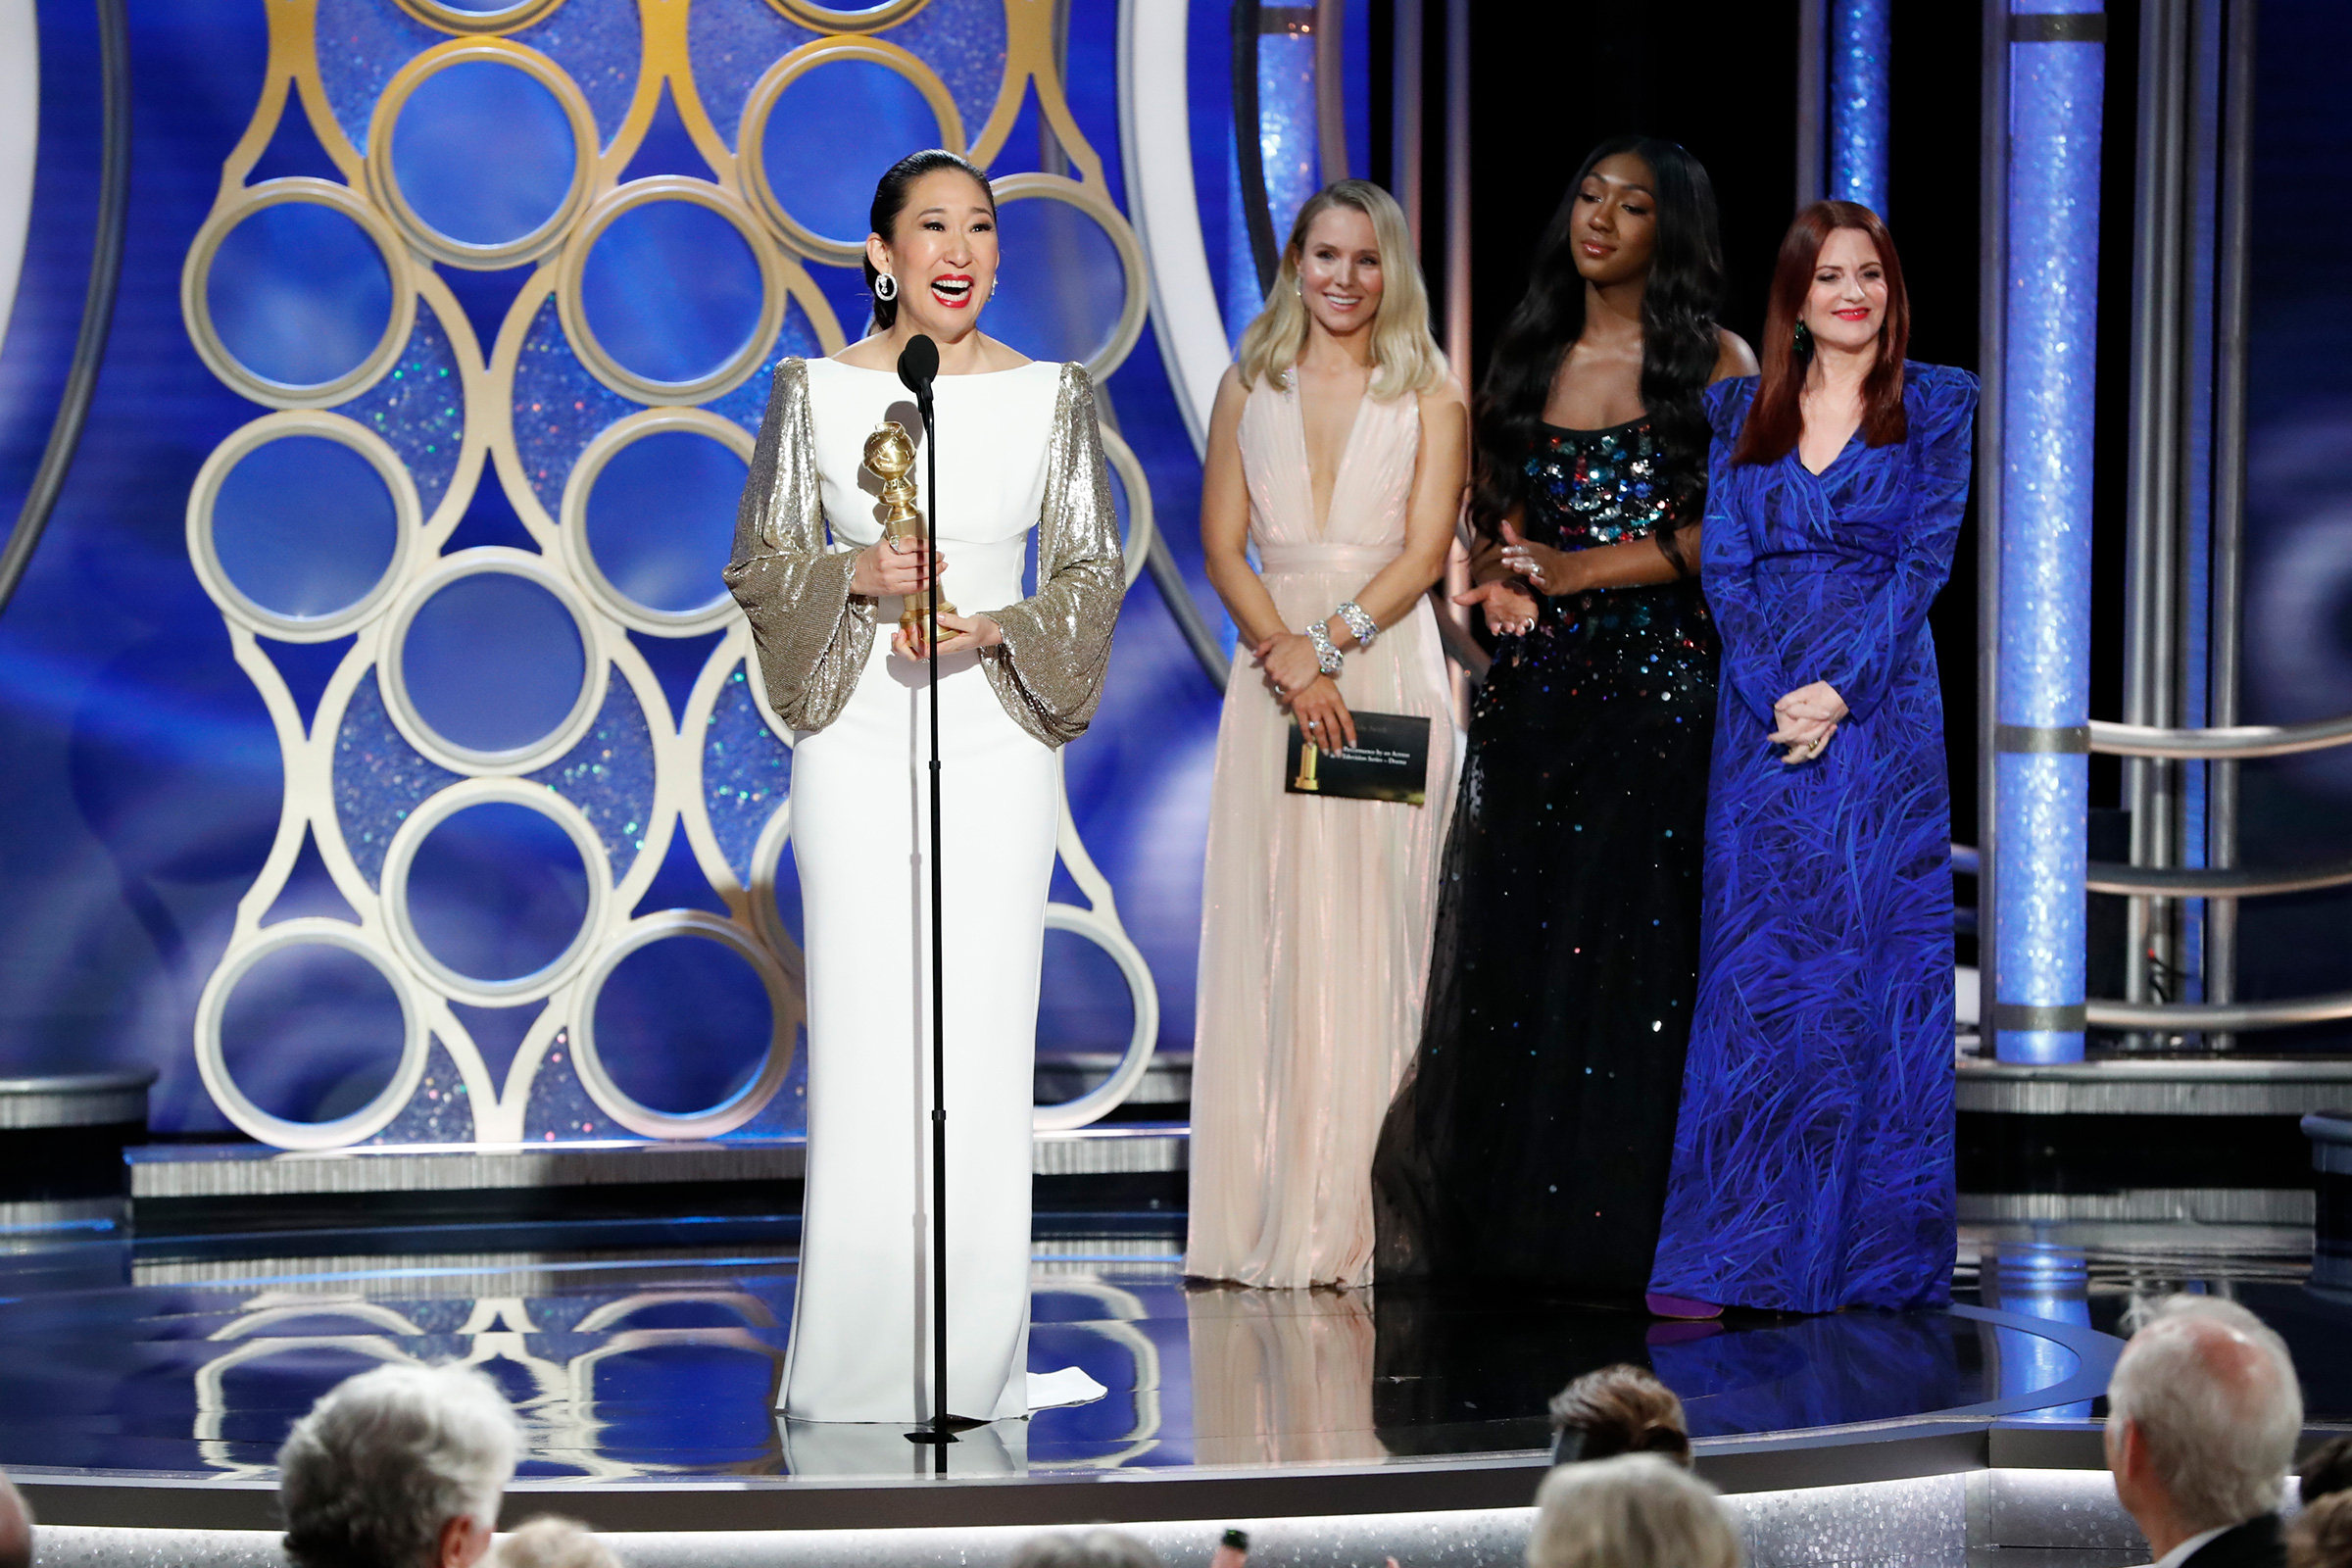 Sandra Oh accepts the Best Performance by an Actress in a Television Series Drama award during the 76th Annual Golden Globe Awards on Jan. 6, 2019. (Paul Drinkwater—NBCUniversal/Getty Images)